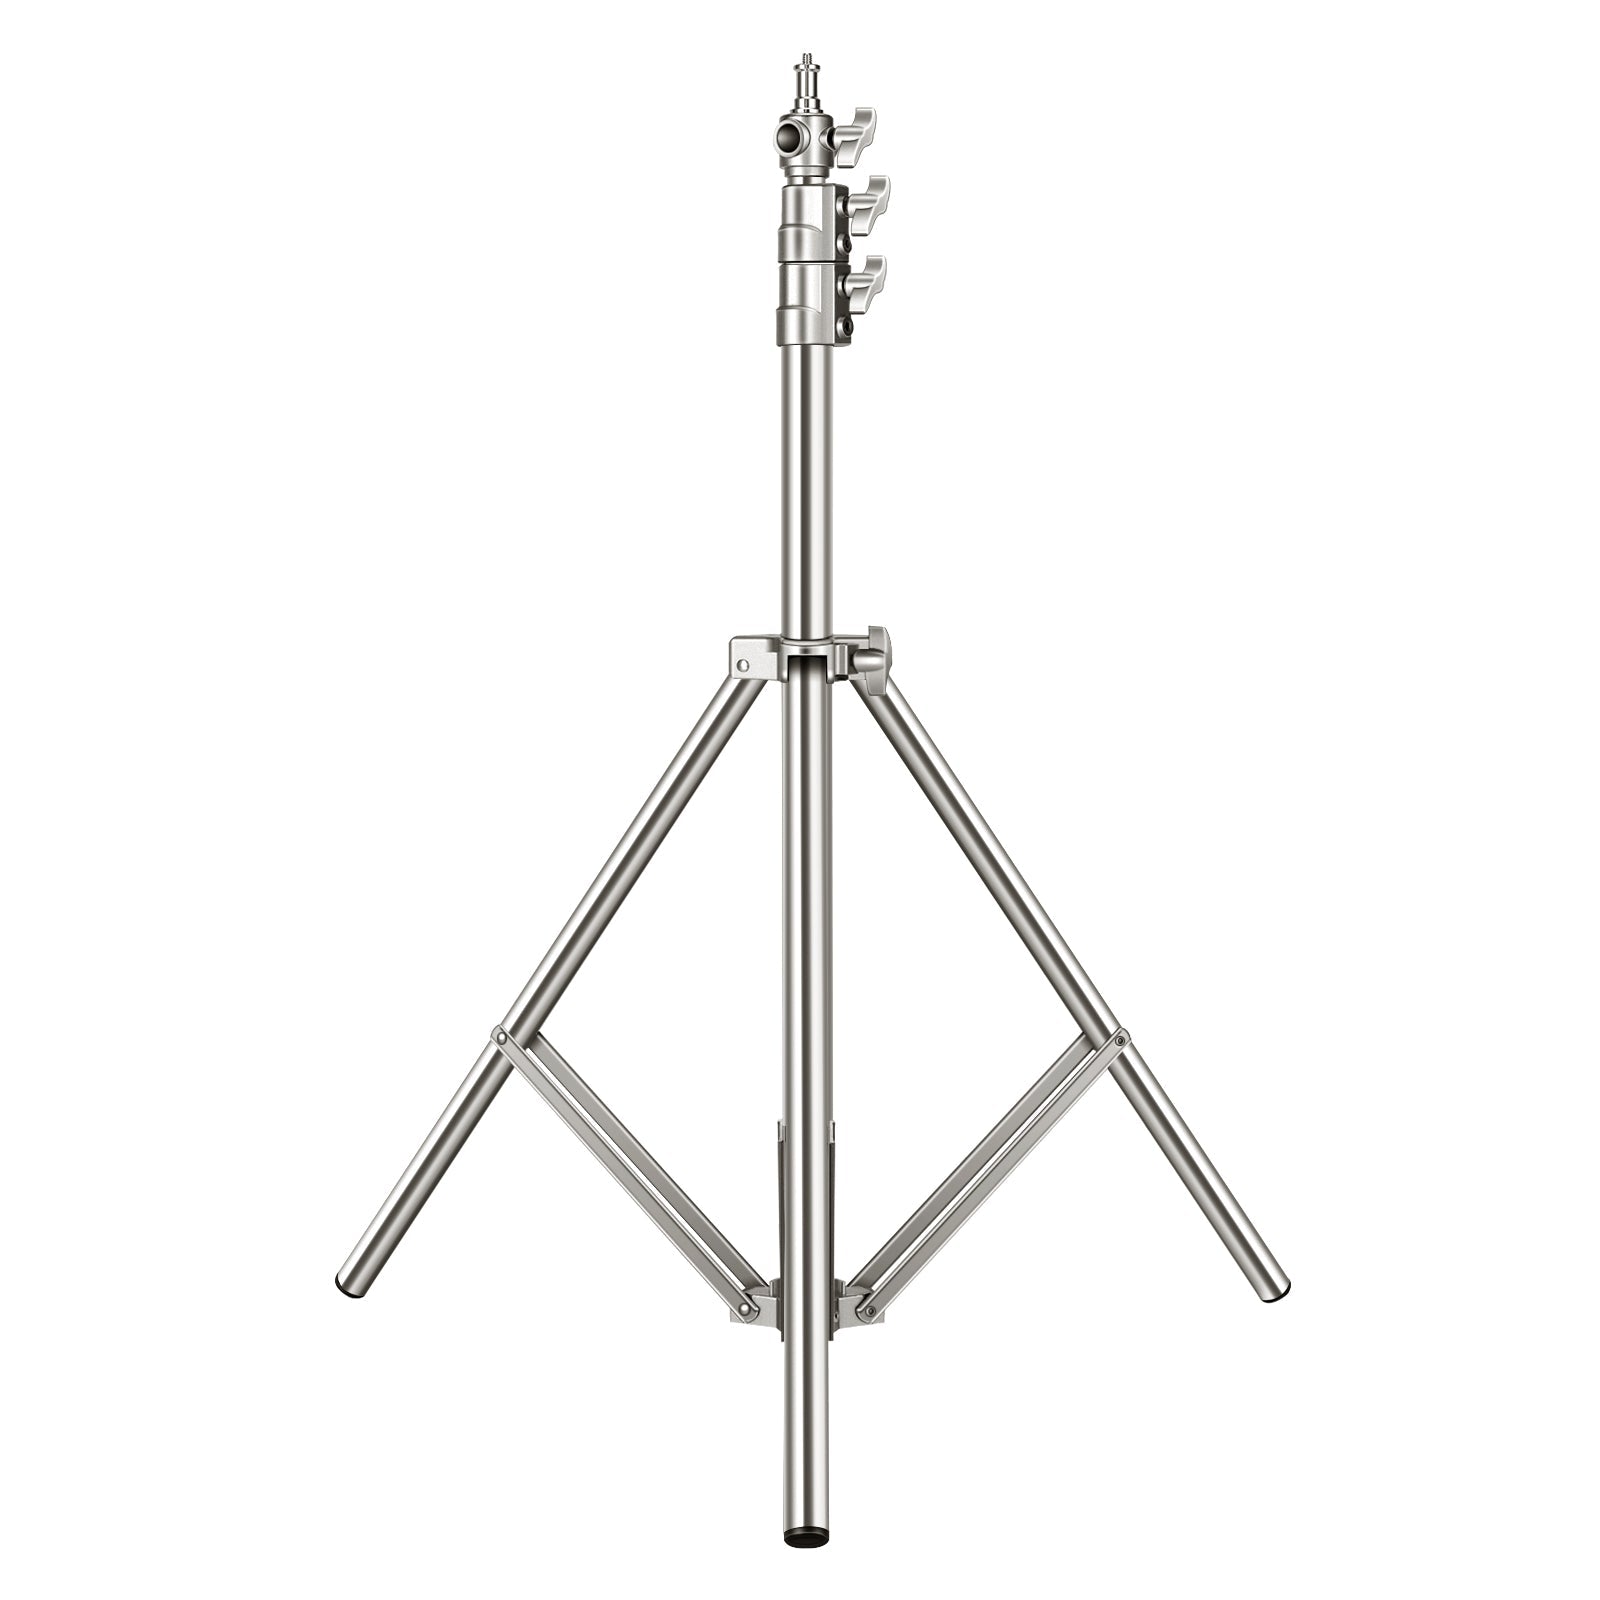 NEEWER 260cm Stainless Steel Photography Light Stand - NEEWER